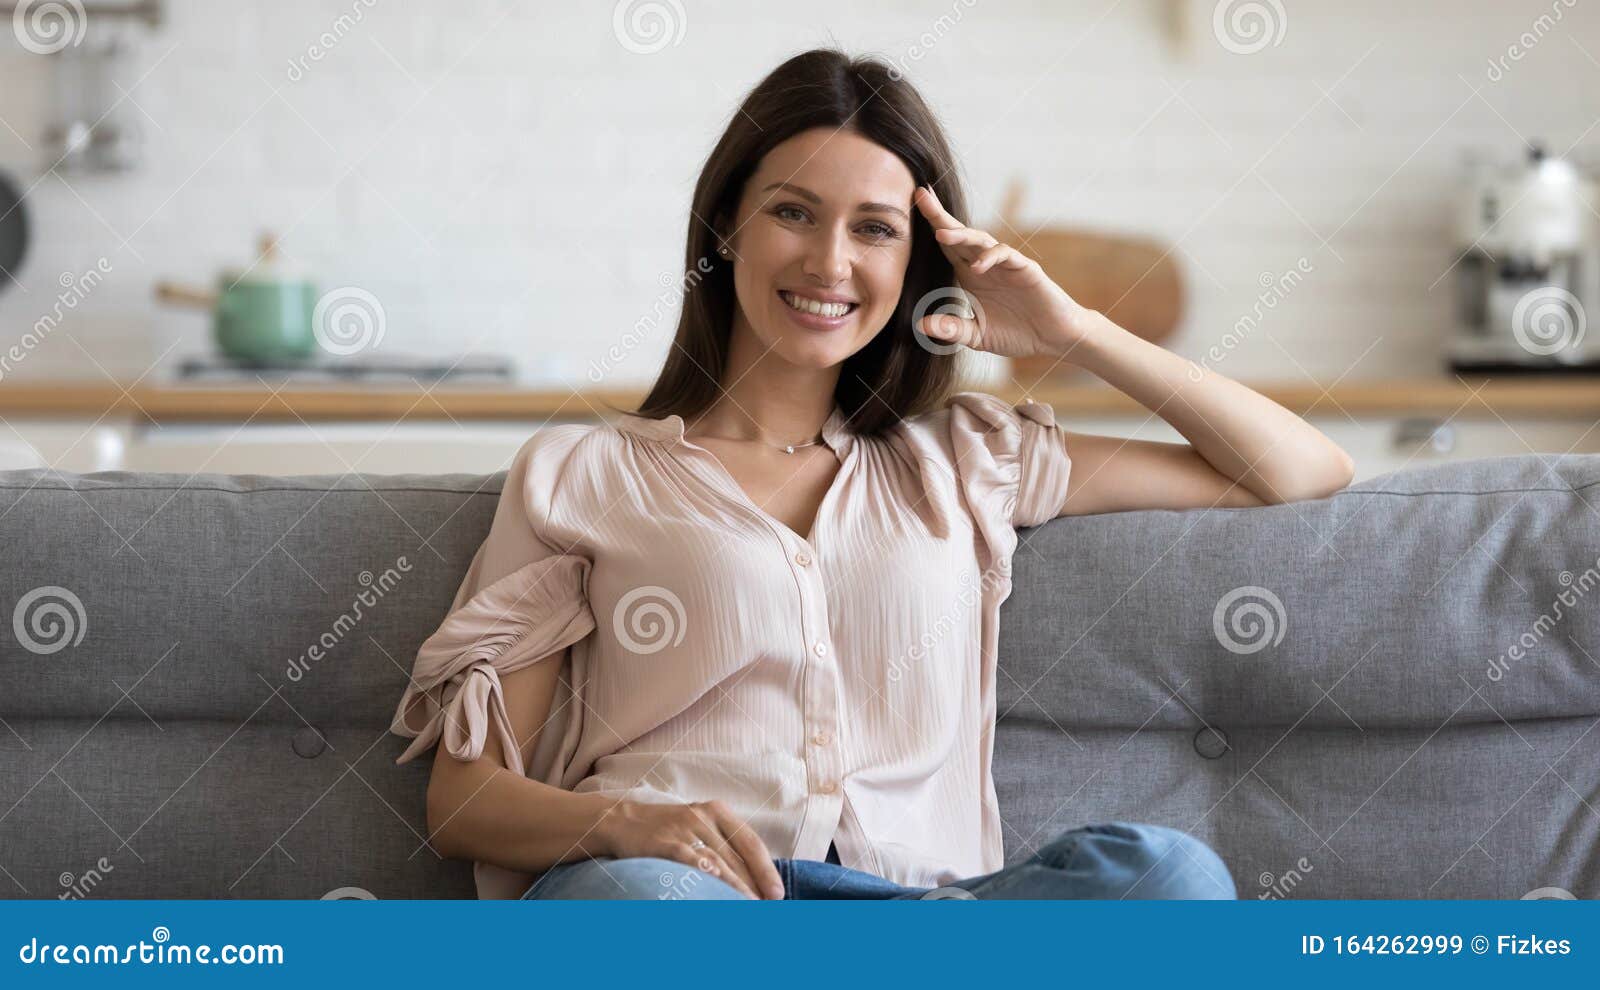 happy 30s woman sitting on cozy sofa in living room.